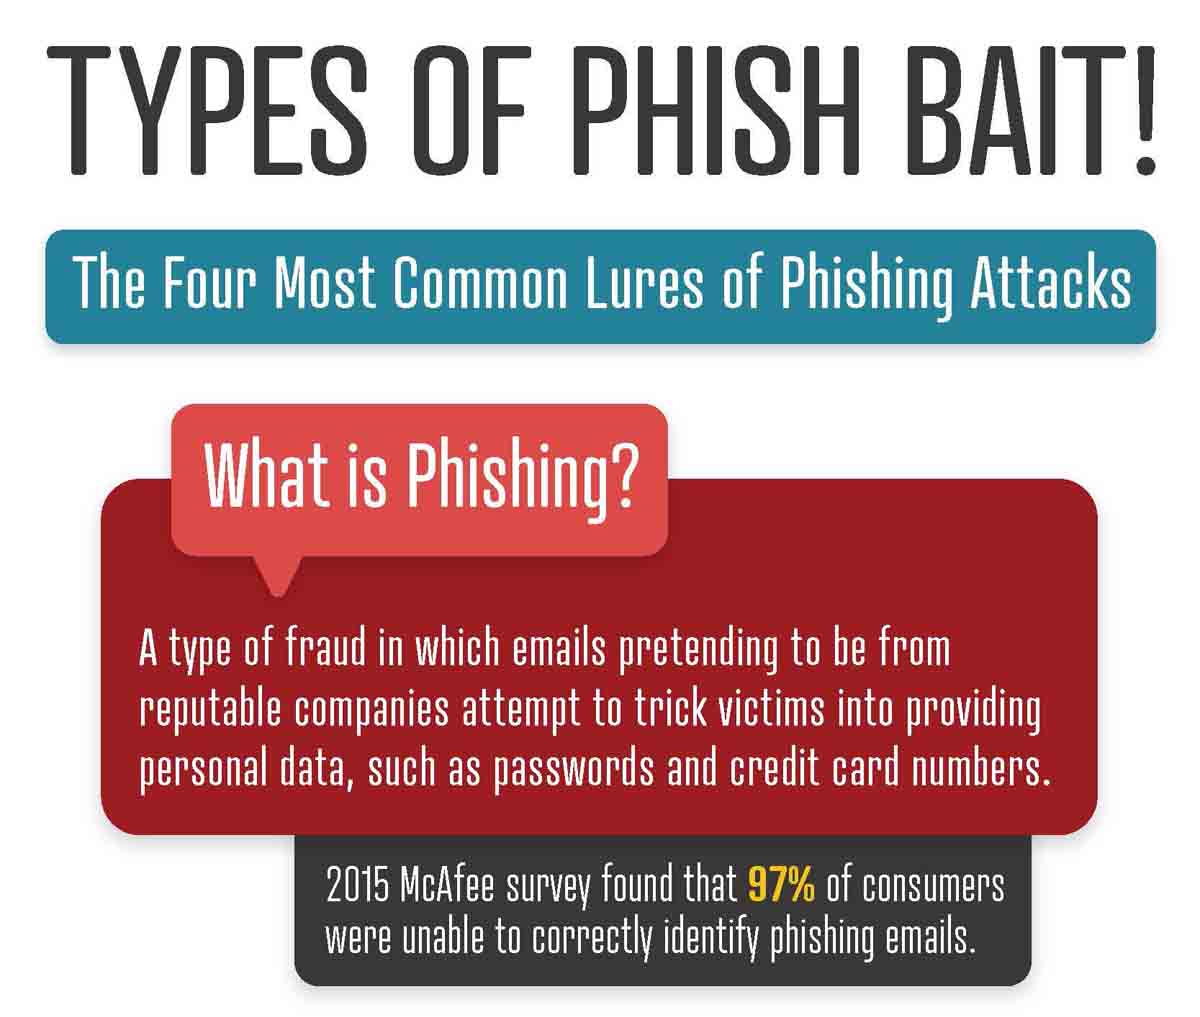 The 4 Most Common Lures of Phishing Attacks